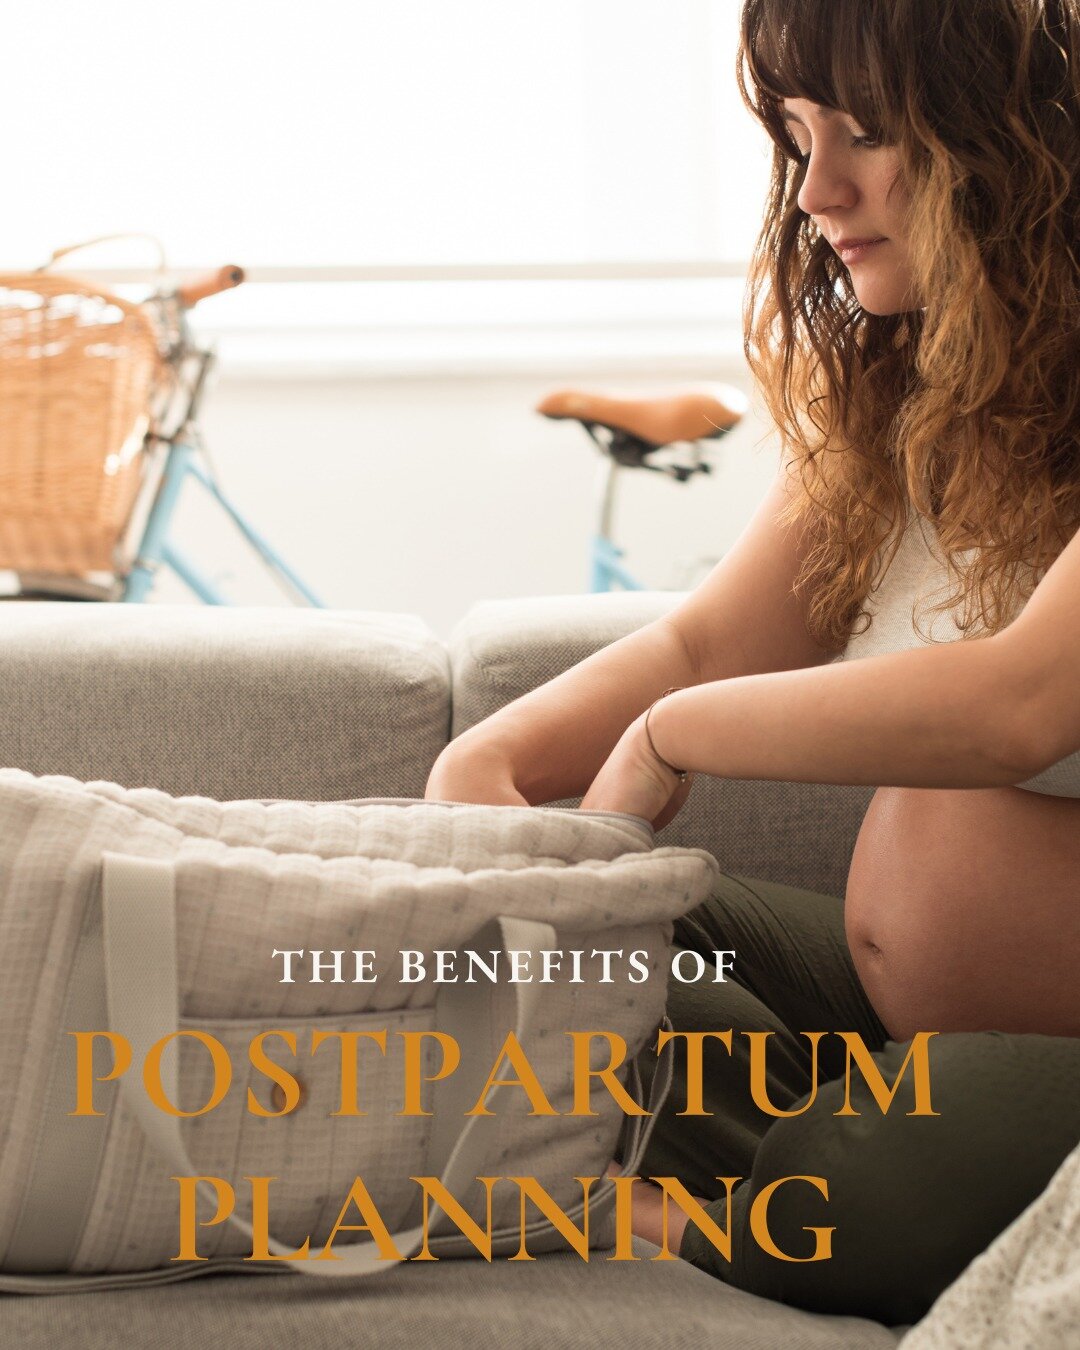 Preparing for life after childbirth is just as important as preparing for the arrival of your little one. Here are some tips for postpartum planning to help you navigate the early weeks and months after giving birth:
📋 Create a Postpartum Plan: Outl